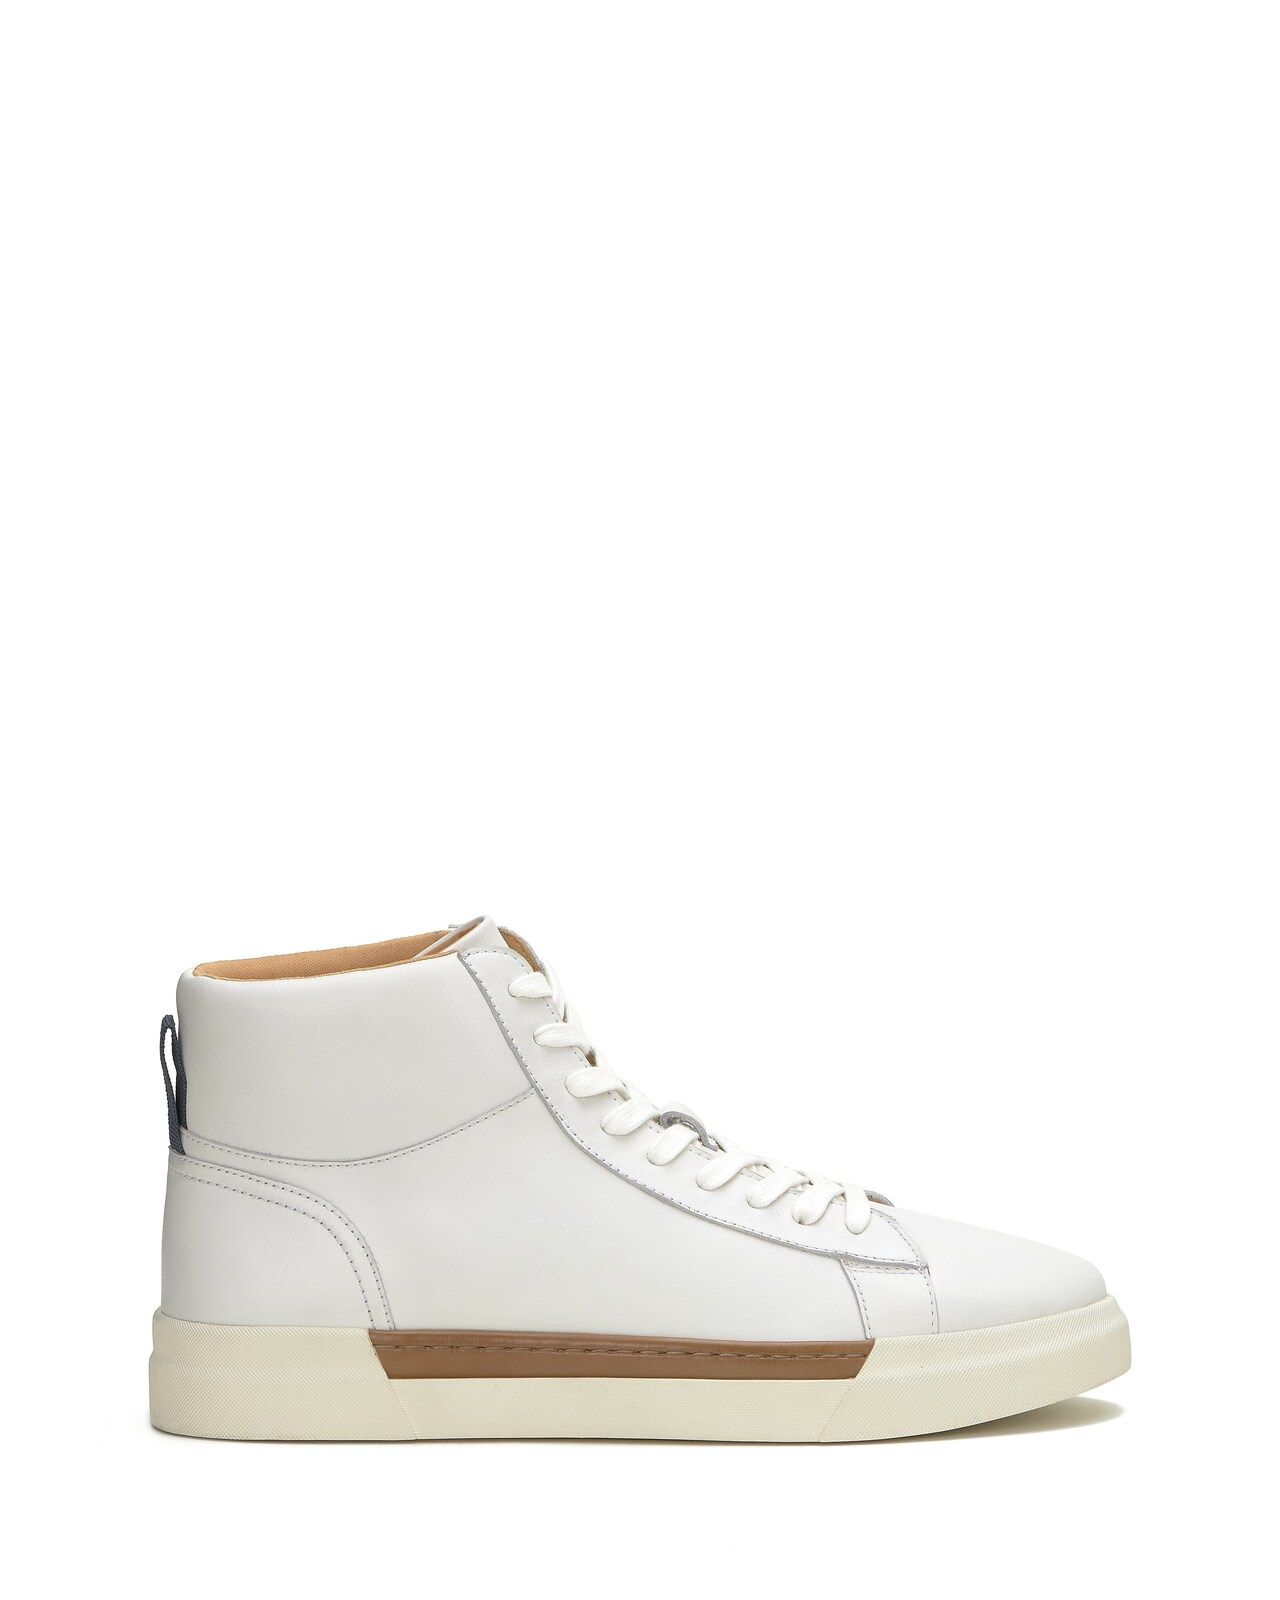 Vince Camuto Men's Ranulf High-top Sneaker | Vince Camuto